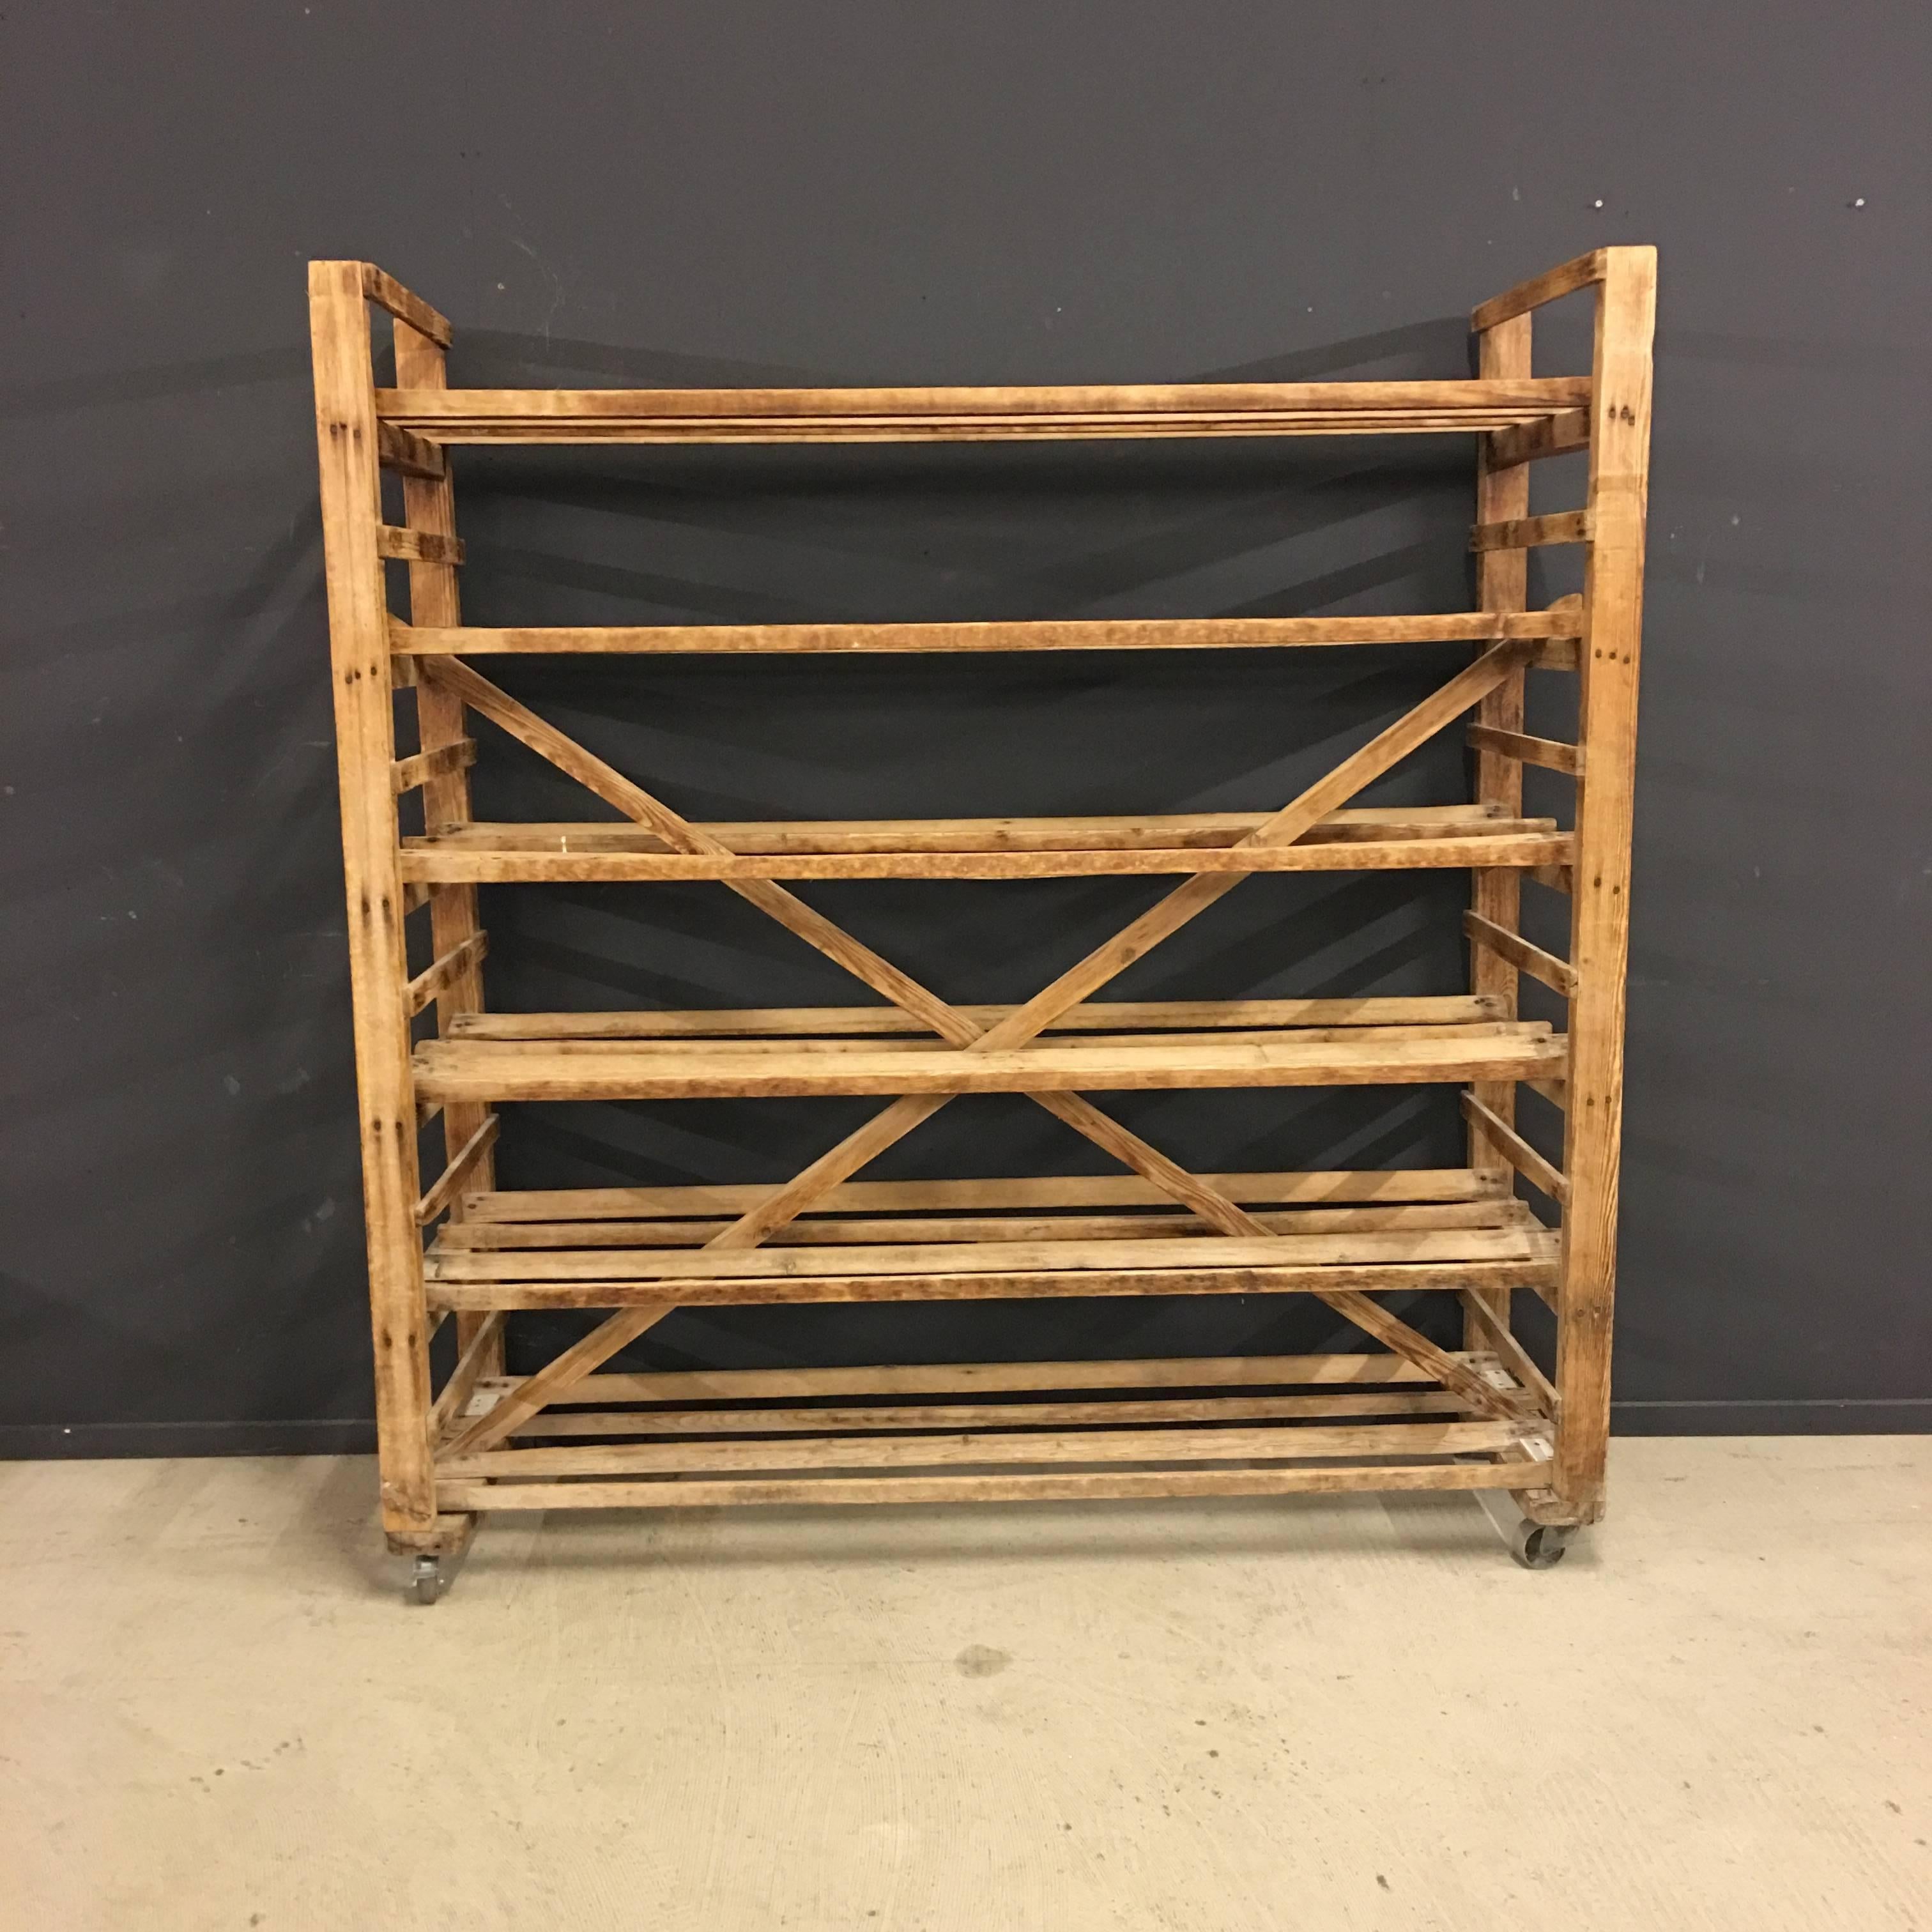 This wooden bakery rack was manufactured in belgium during 1930s. Made of pine wood.